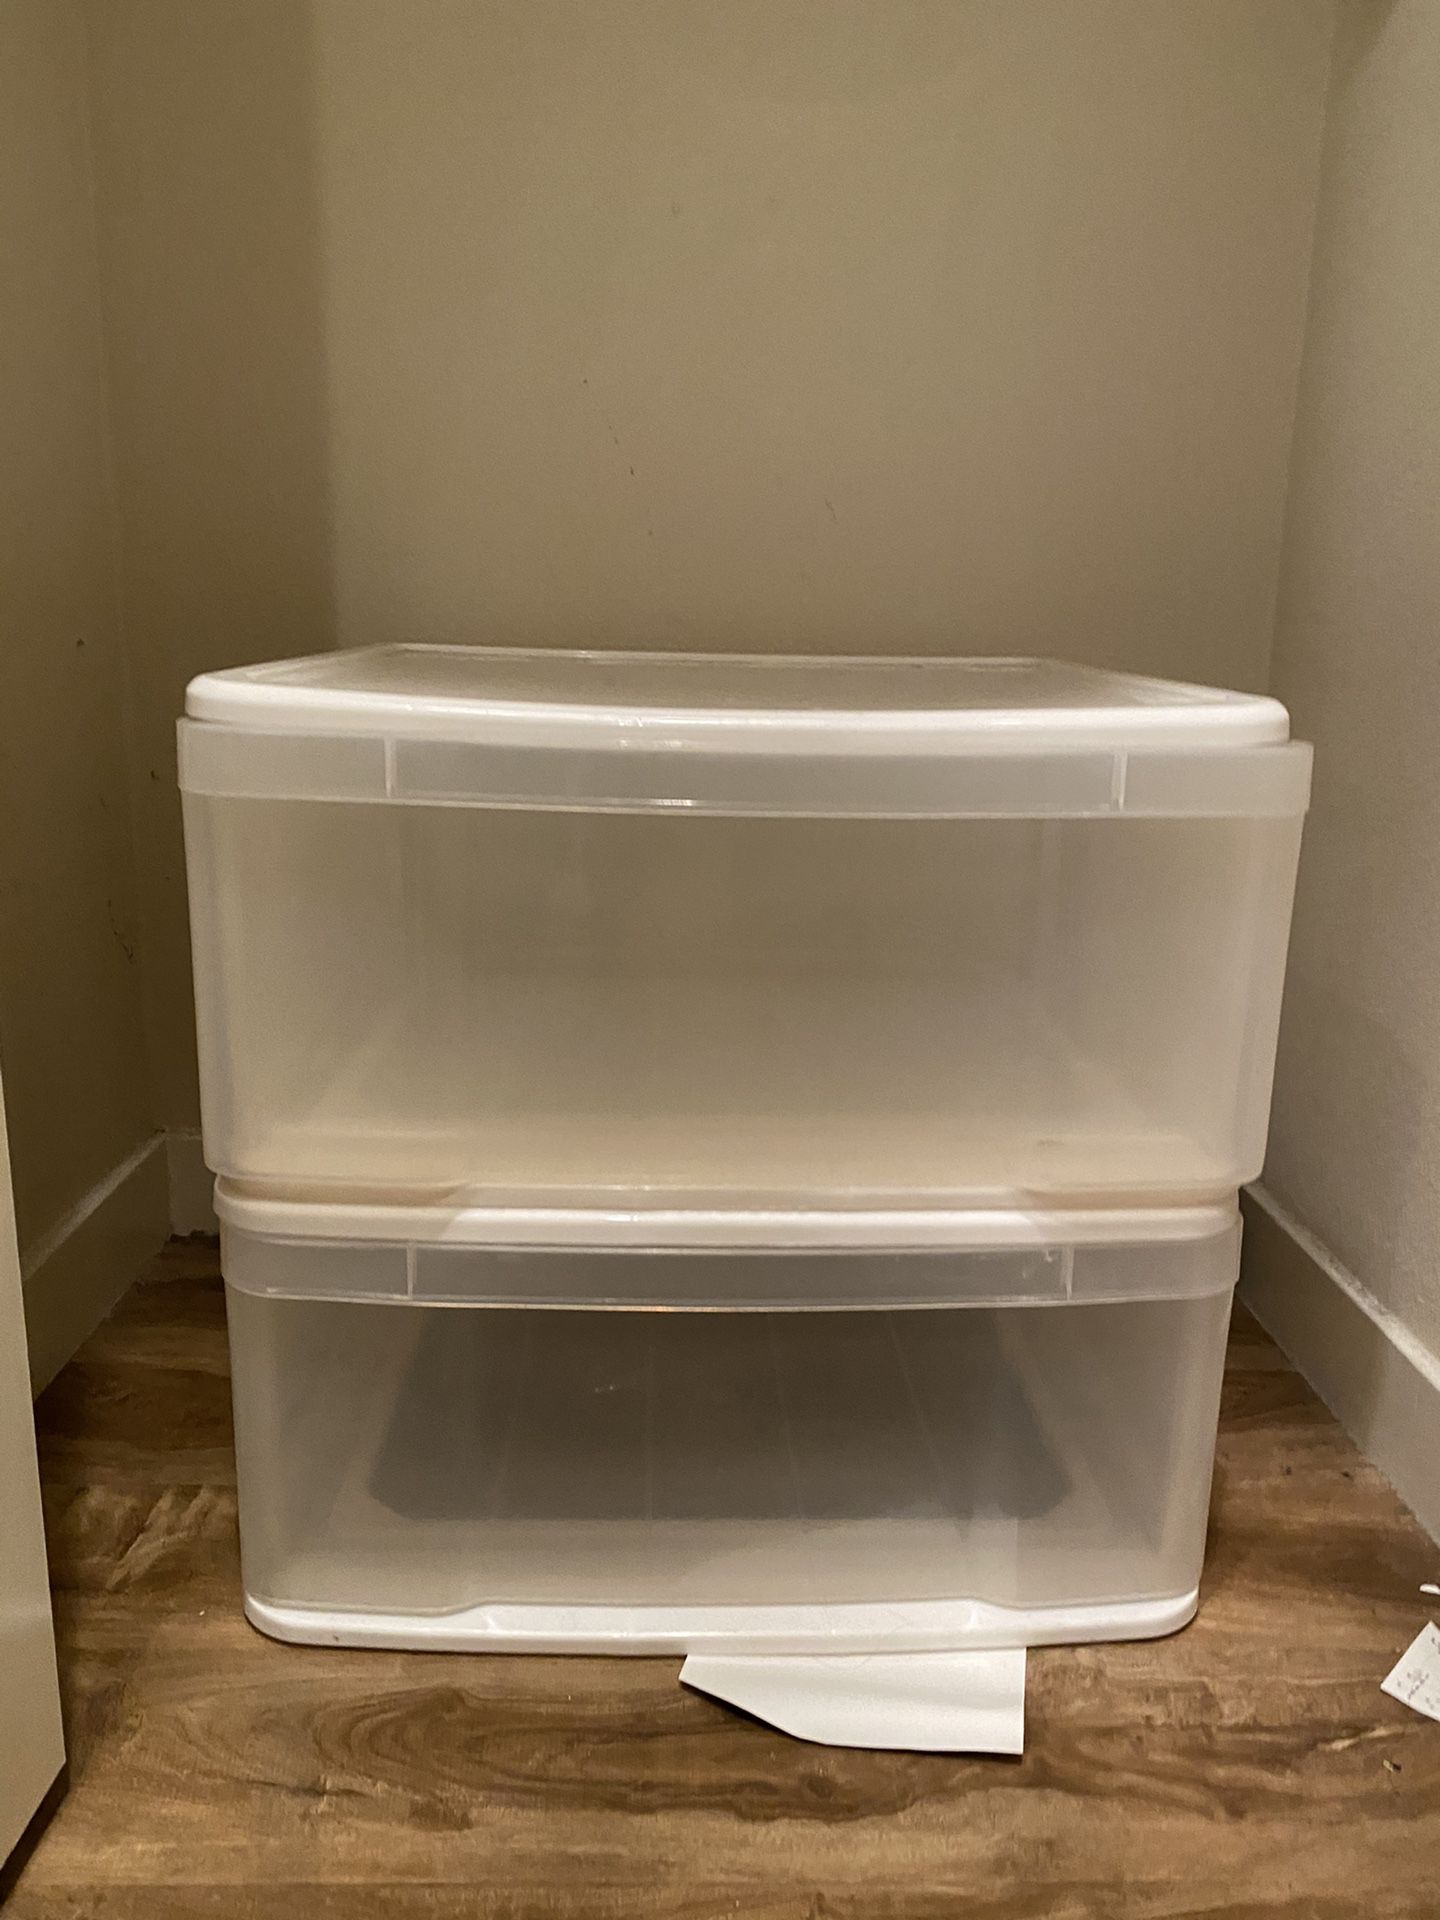 Two rows of plastic drawers